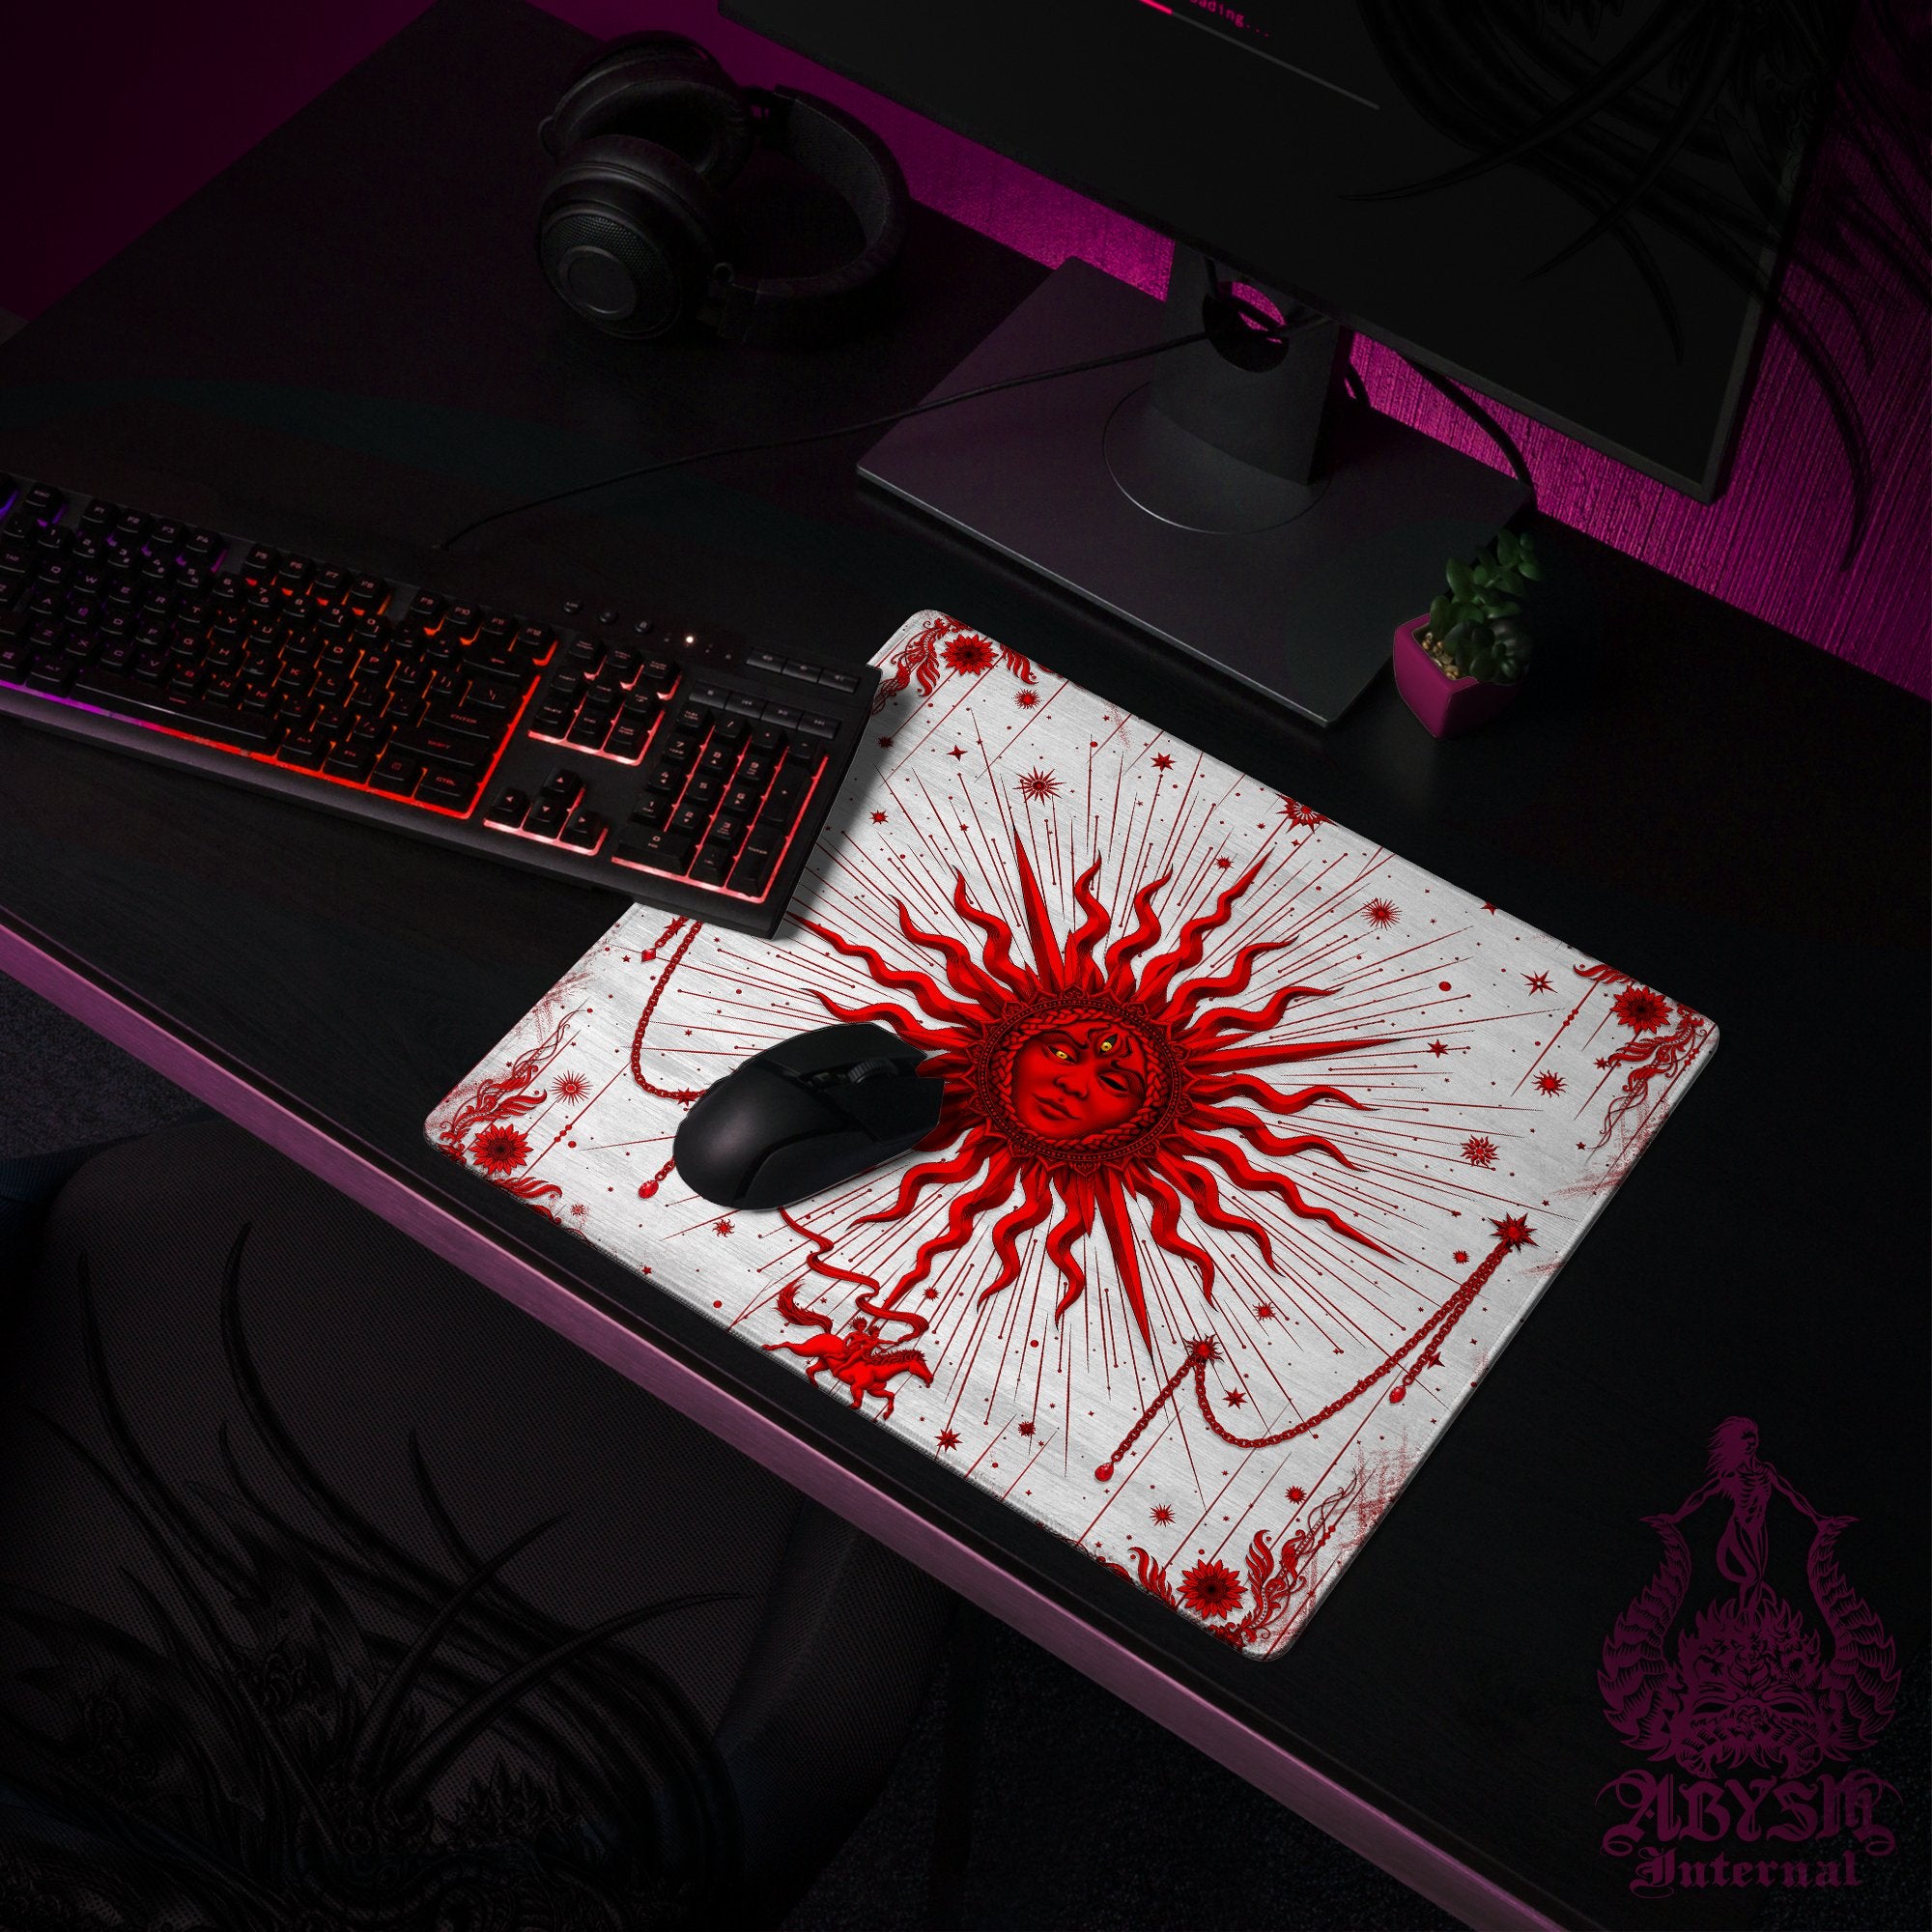 Red Sun Mouse Pad, White Goth Gaming Desk Mat, Tarot Arcana Workpad, Witch Table Protector Cover, Esoteric Art Print - Abysm Internal